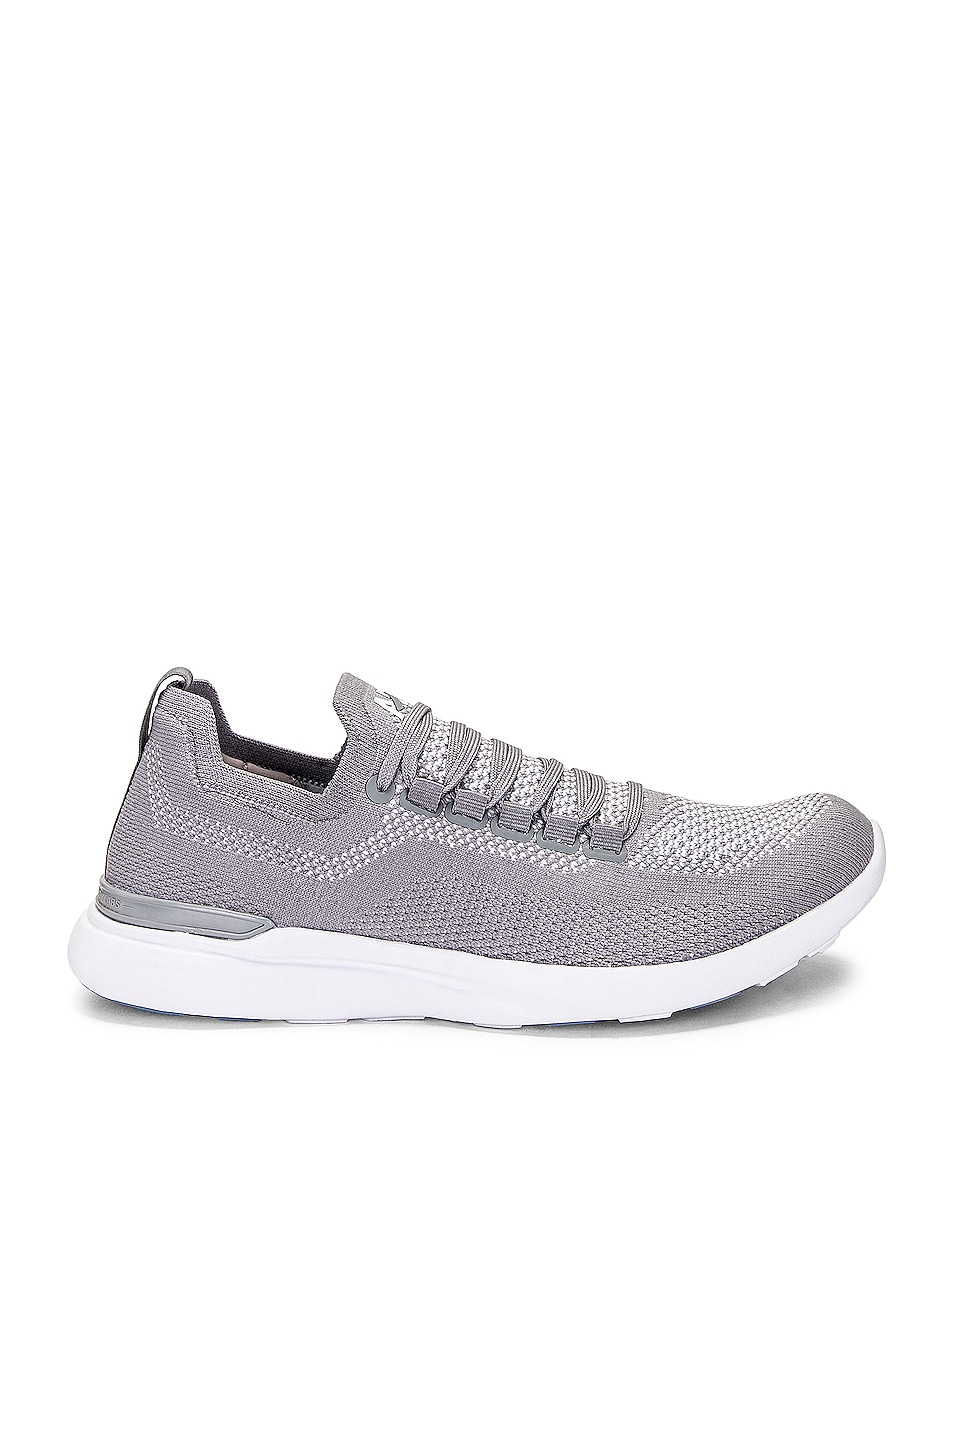 Image 1 of APL: Athletic Propulsion Labs Techloom Breeze Sneaker in Cement & White